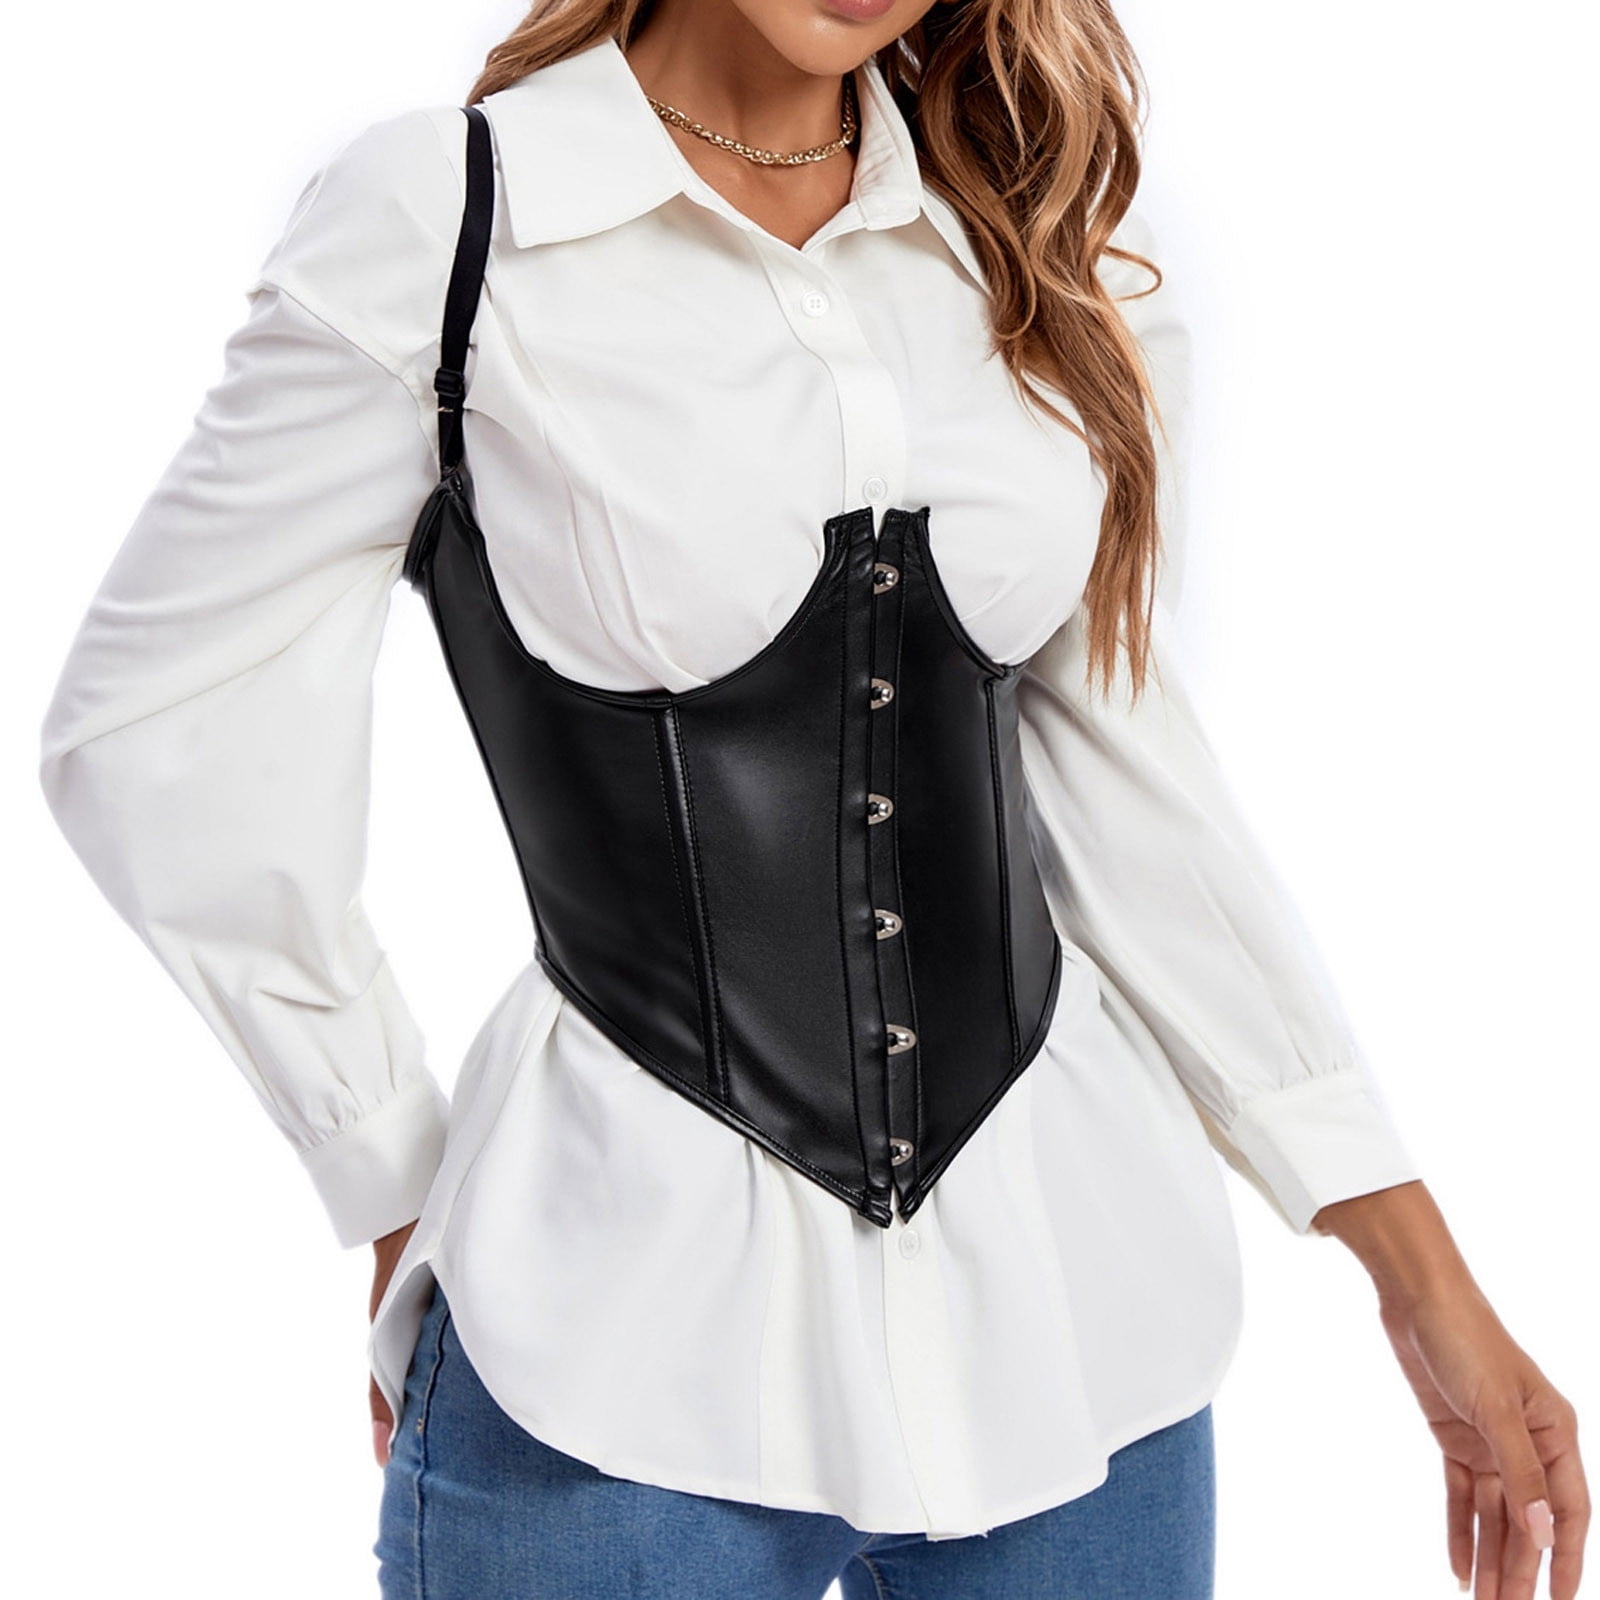 Lace & Leather Corset Belt Costume Corset for Goth 